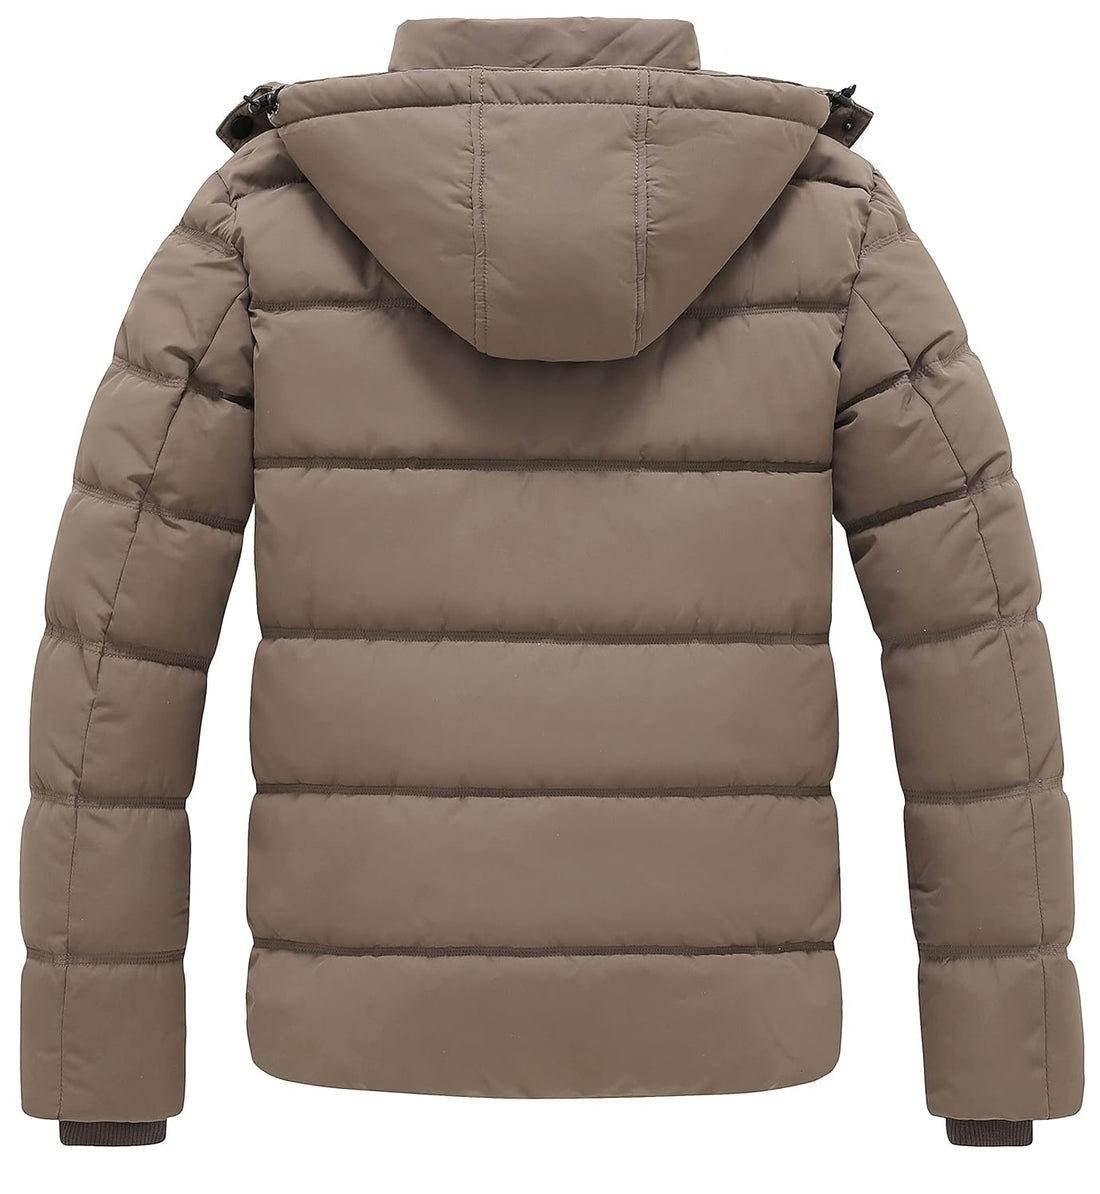 GGleaf Men's Hooded Winter Coat Warm Puffer Jacket Thicken Cotton Coat with Removable Hood, Khaki, XX-Large